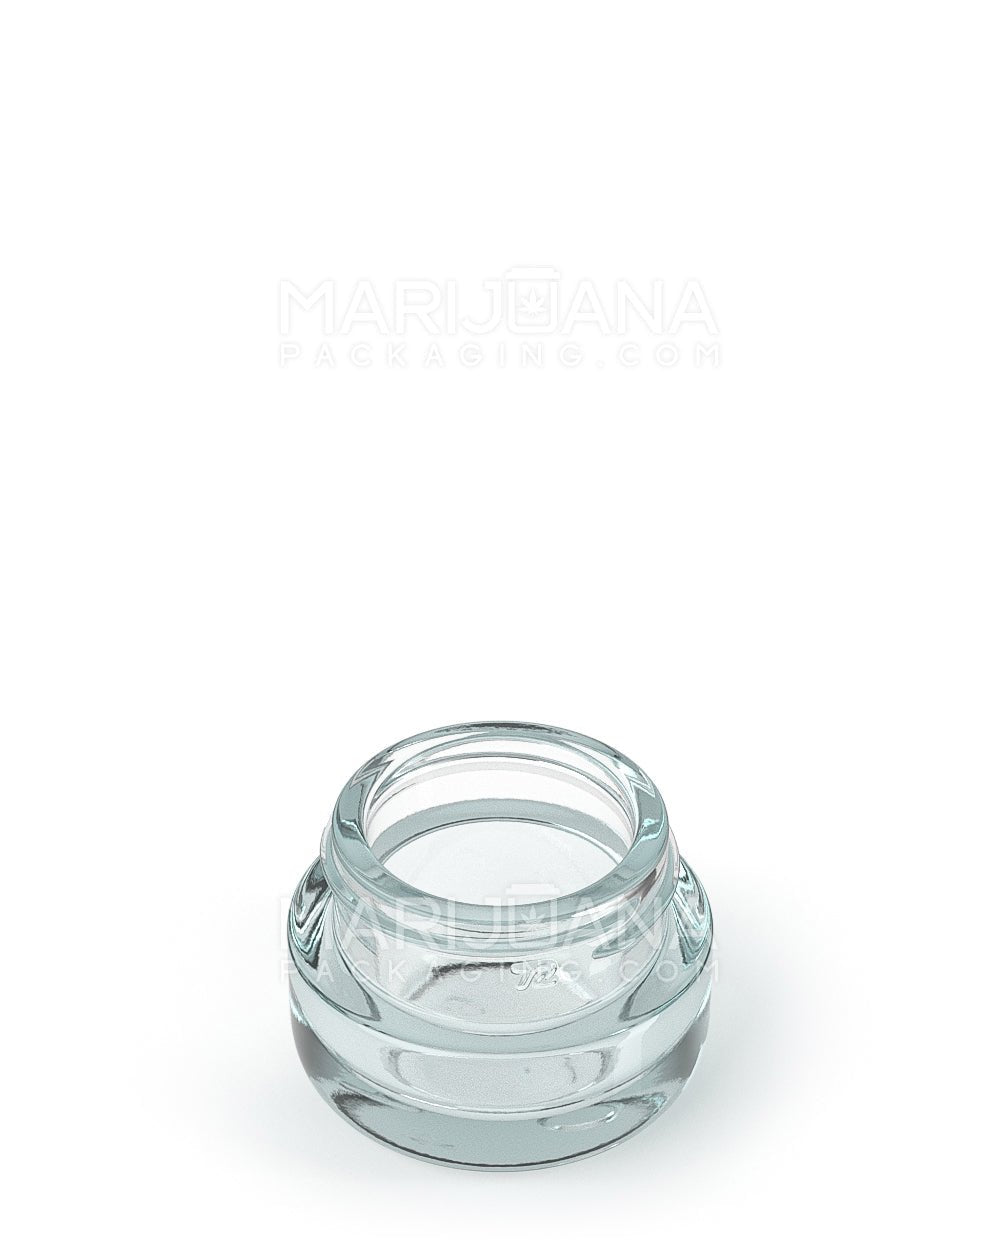 POLLEN GEAR | HiLine Glossy Clear Glass Concentrate Containers | 29mm - 5mL - 308 Count - 2